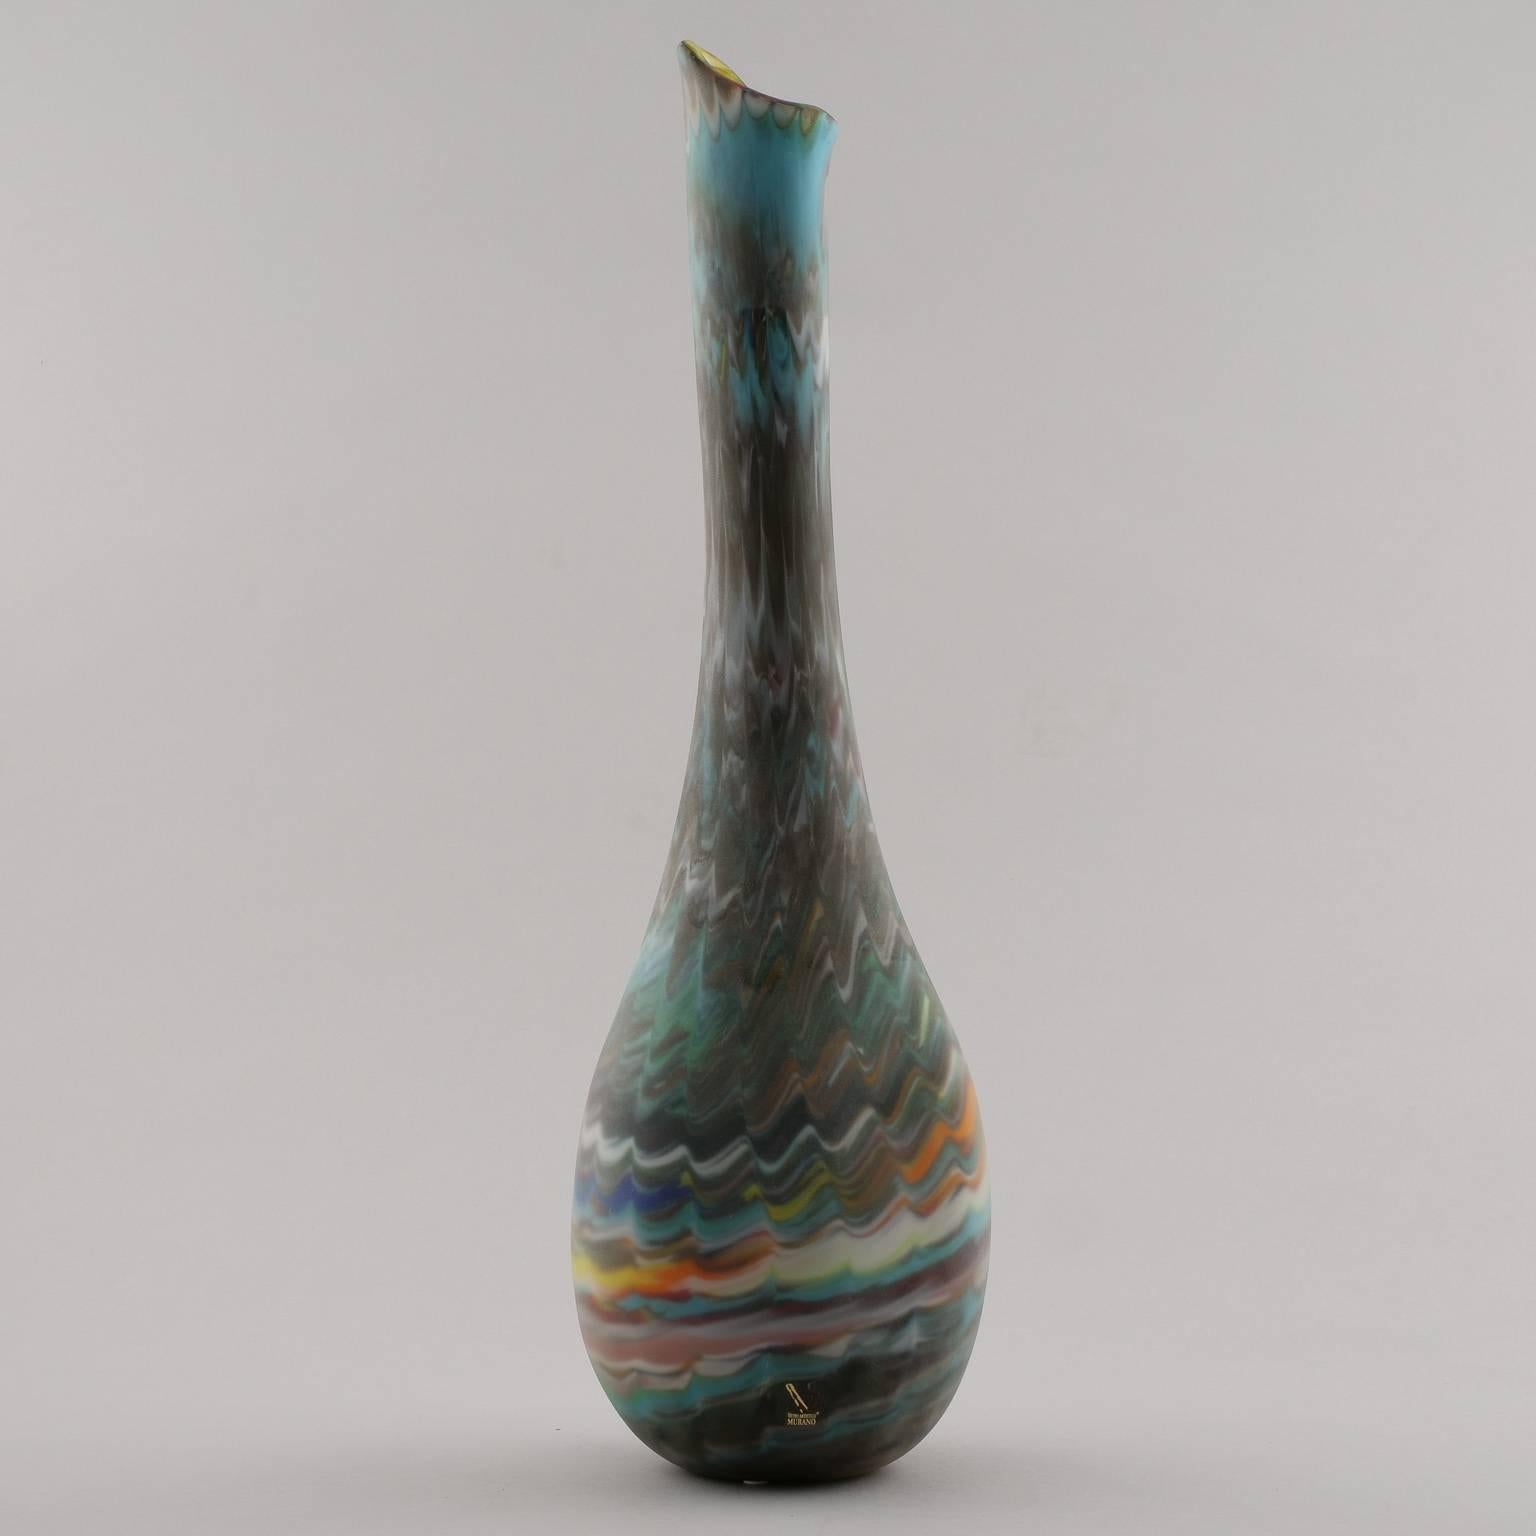 Murano glass vase designed by Missoni with iconic multicolor chevron stripes, circa 2000-2009. Round, flattish base with long, narrow neck. Signed by the artist on underside.
      